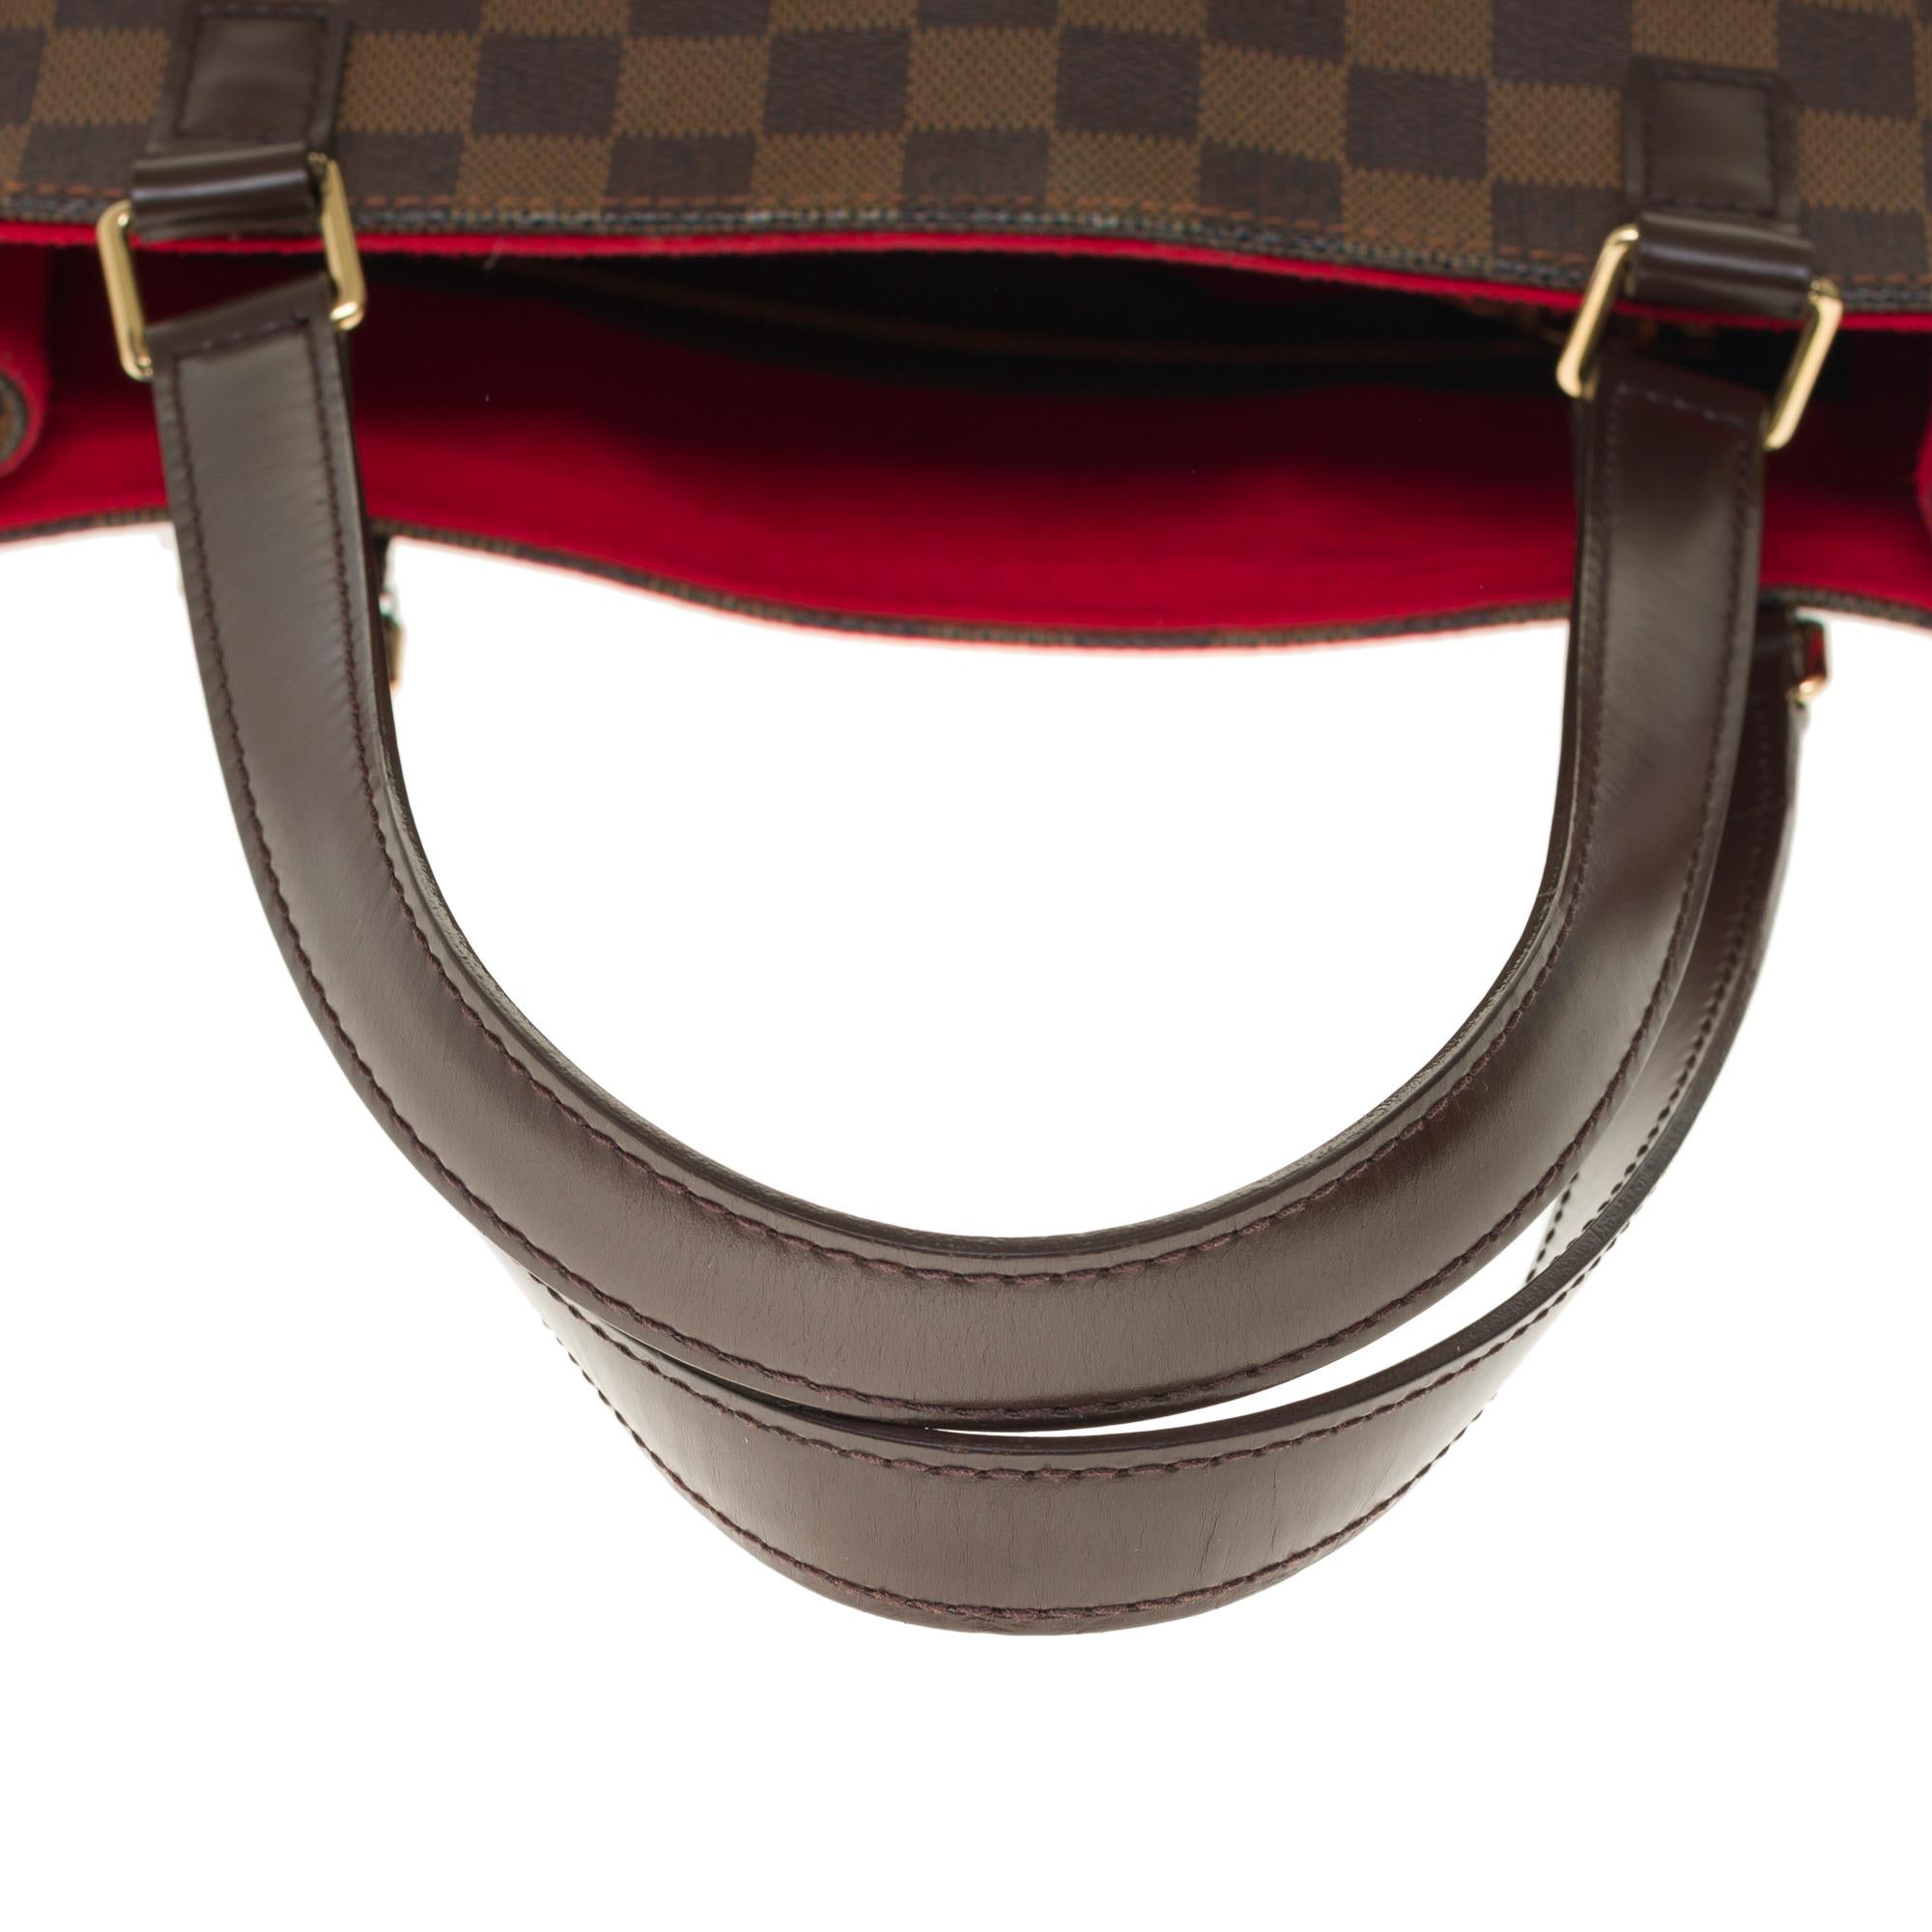 Women's Louis Vuitton Tote in brown checkered canvas and brown leather